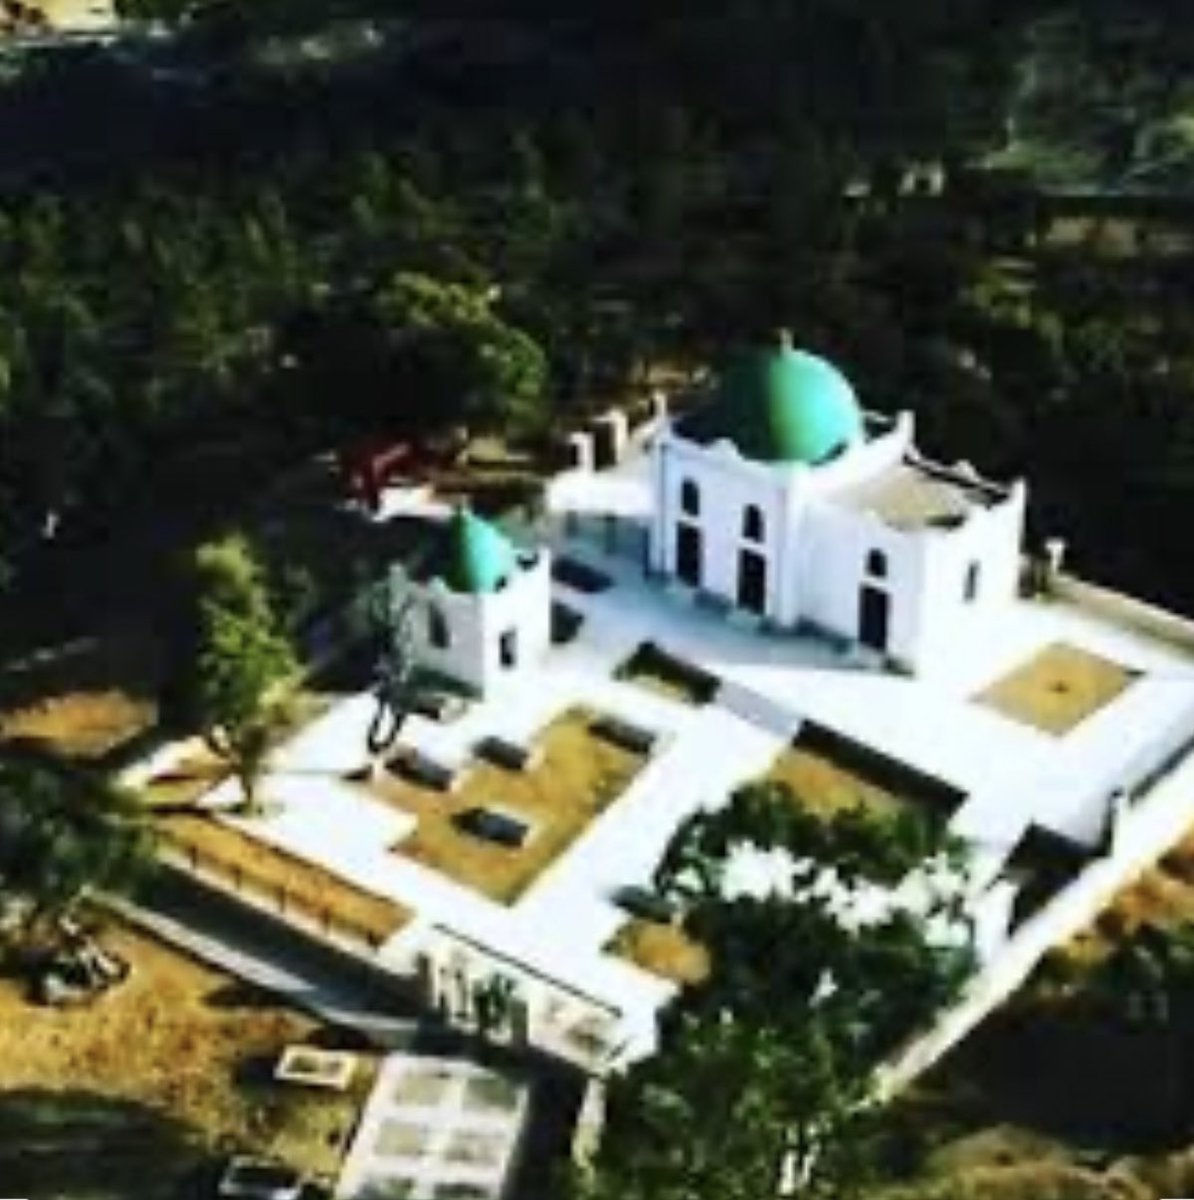 The place where the first Muslim settlement took place in the world Wukro,Tigray. It all began in the 7th C. AD when the first followers of Prophet Mohammed (pbuh) were persecuted and oppressed in their own land by the Quraysh tribe of Mecca for their belief in Islam.